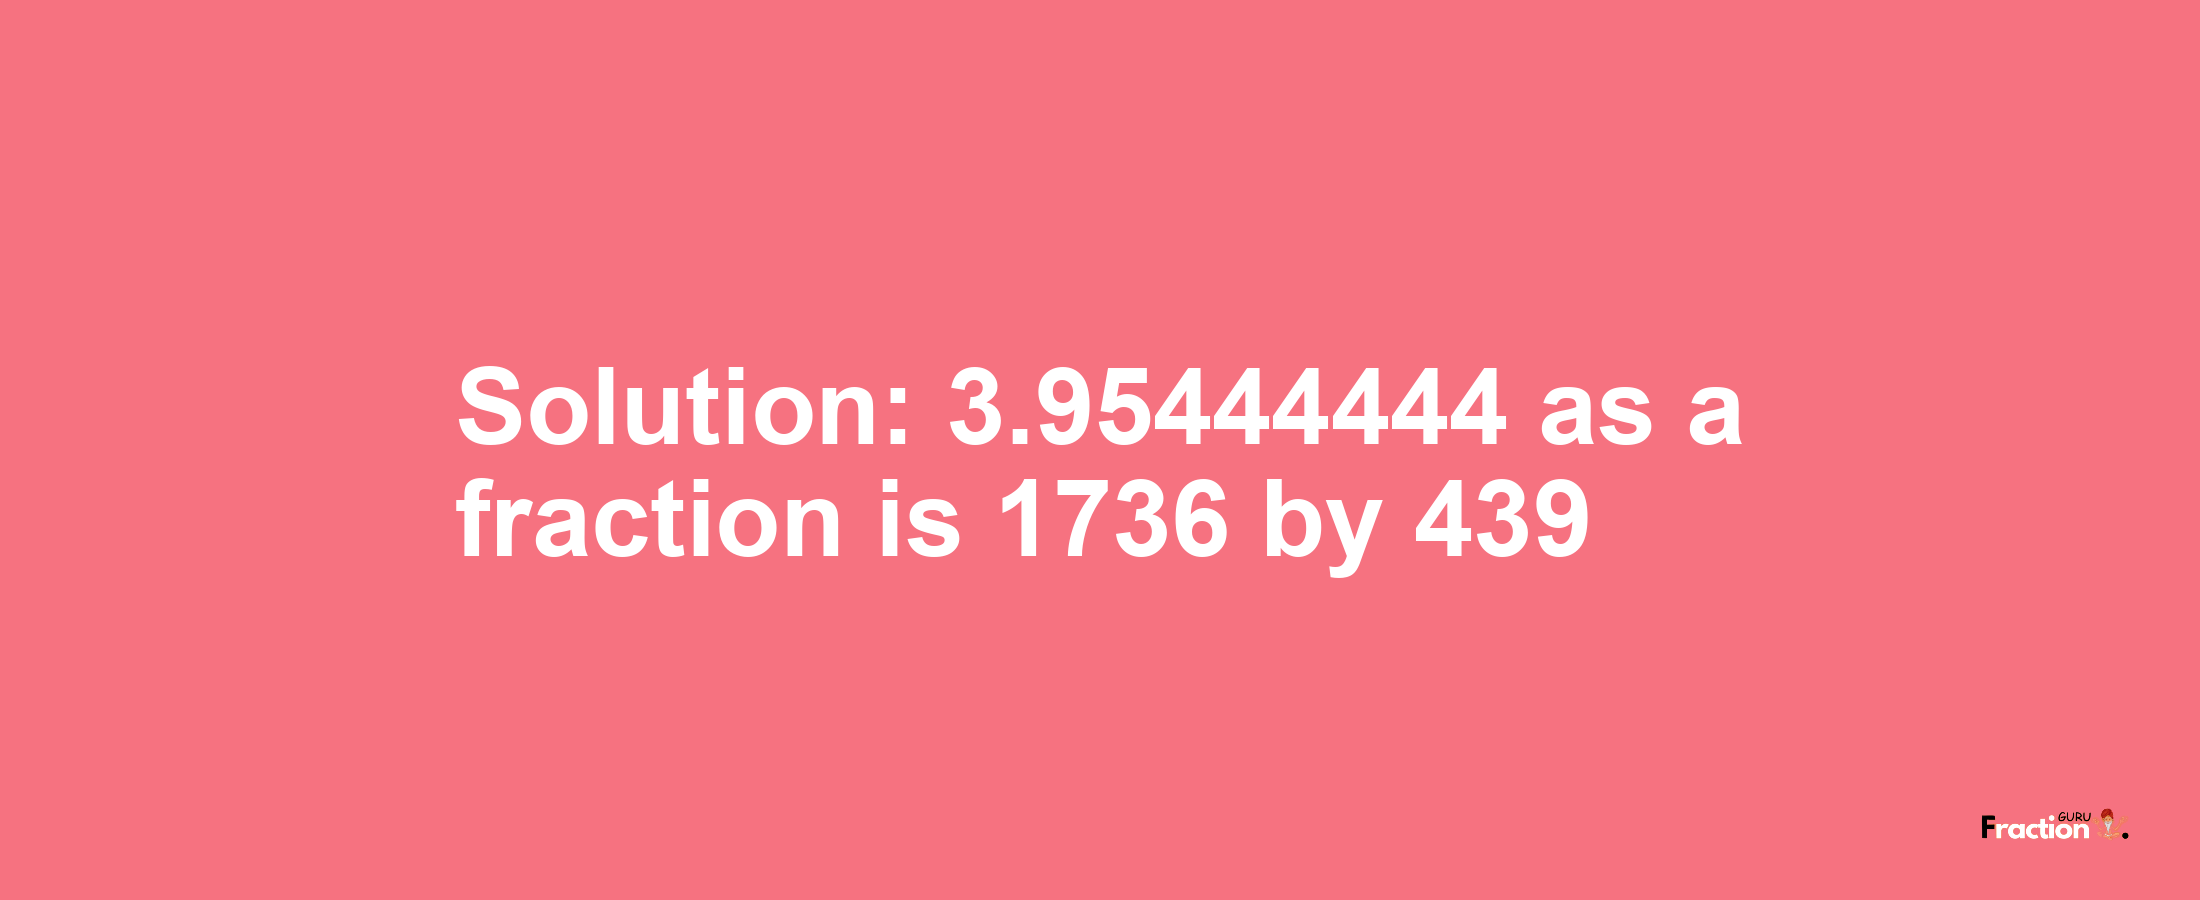 Solution:3.95444444 as a fraction is 1736/439